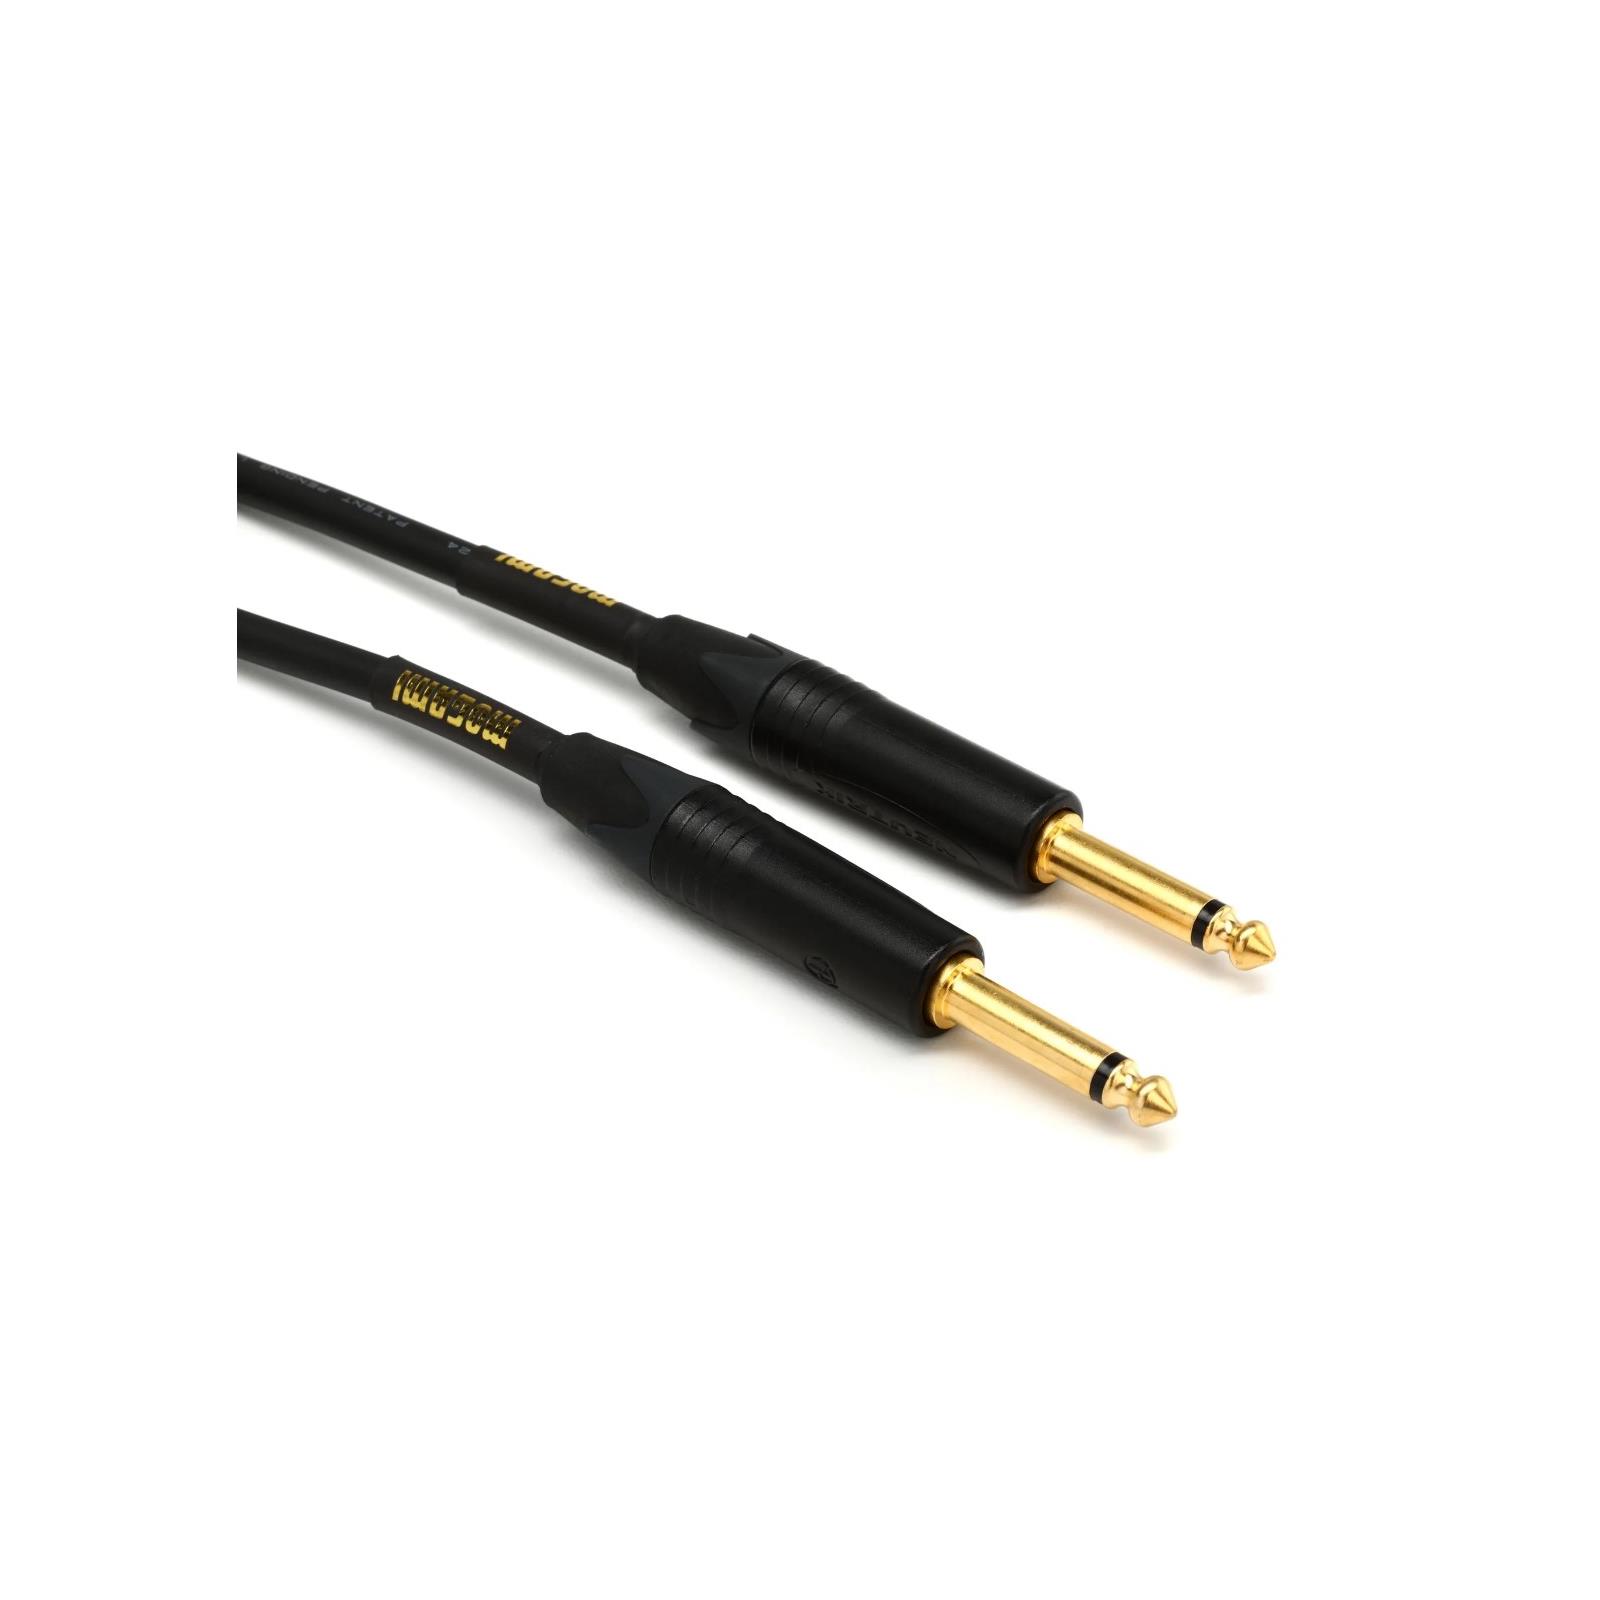 Mogami 25' Gold Instrument Cable S/RA